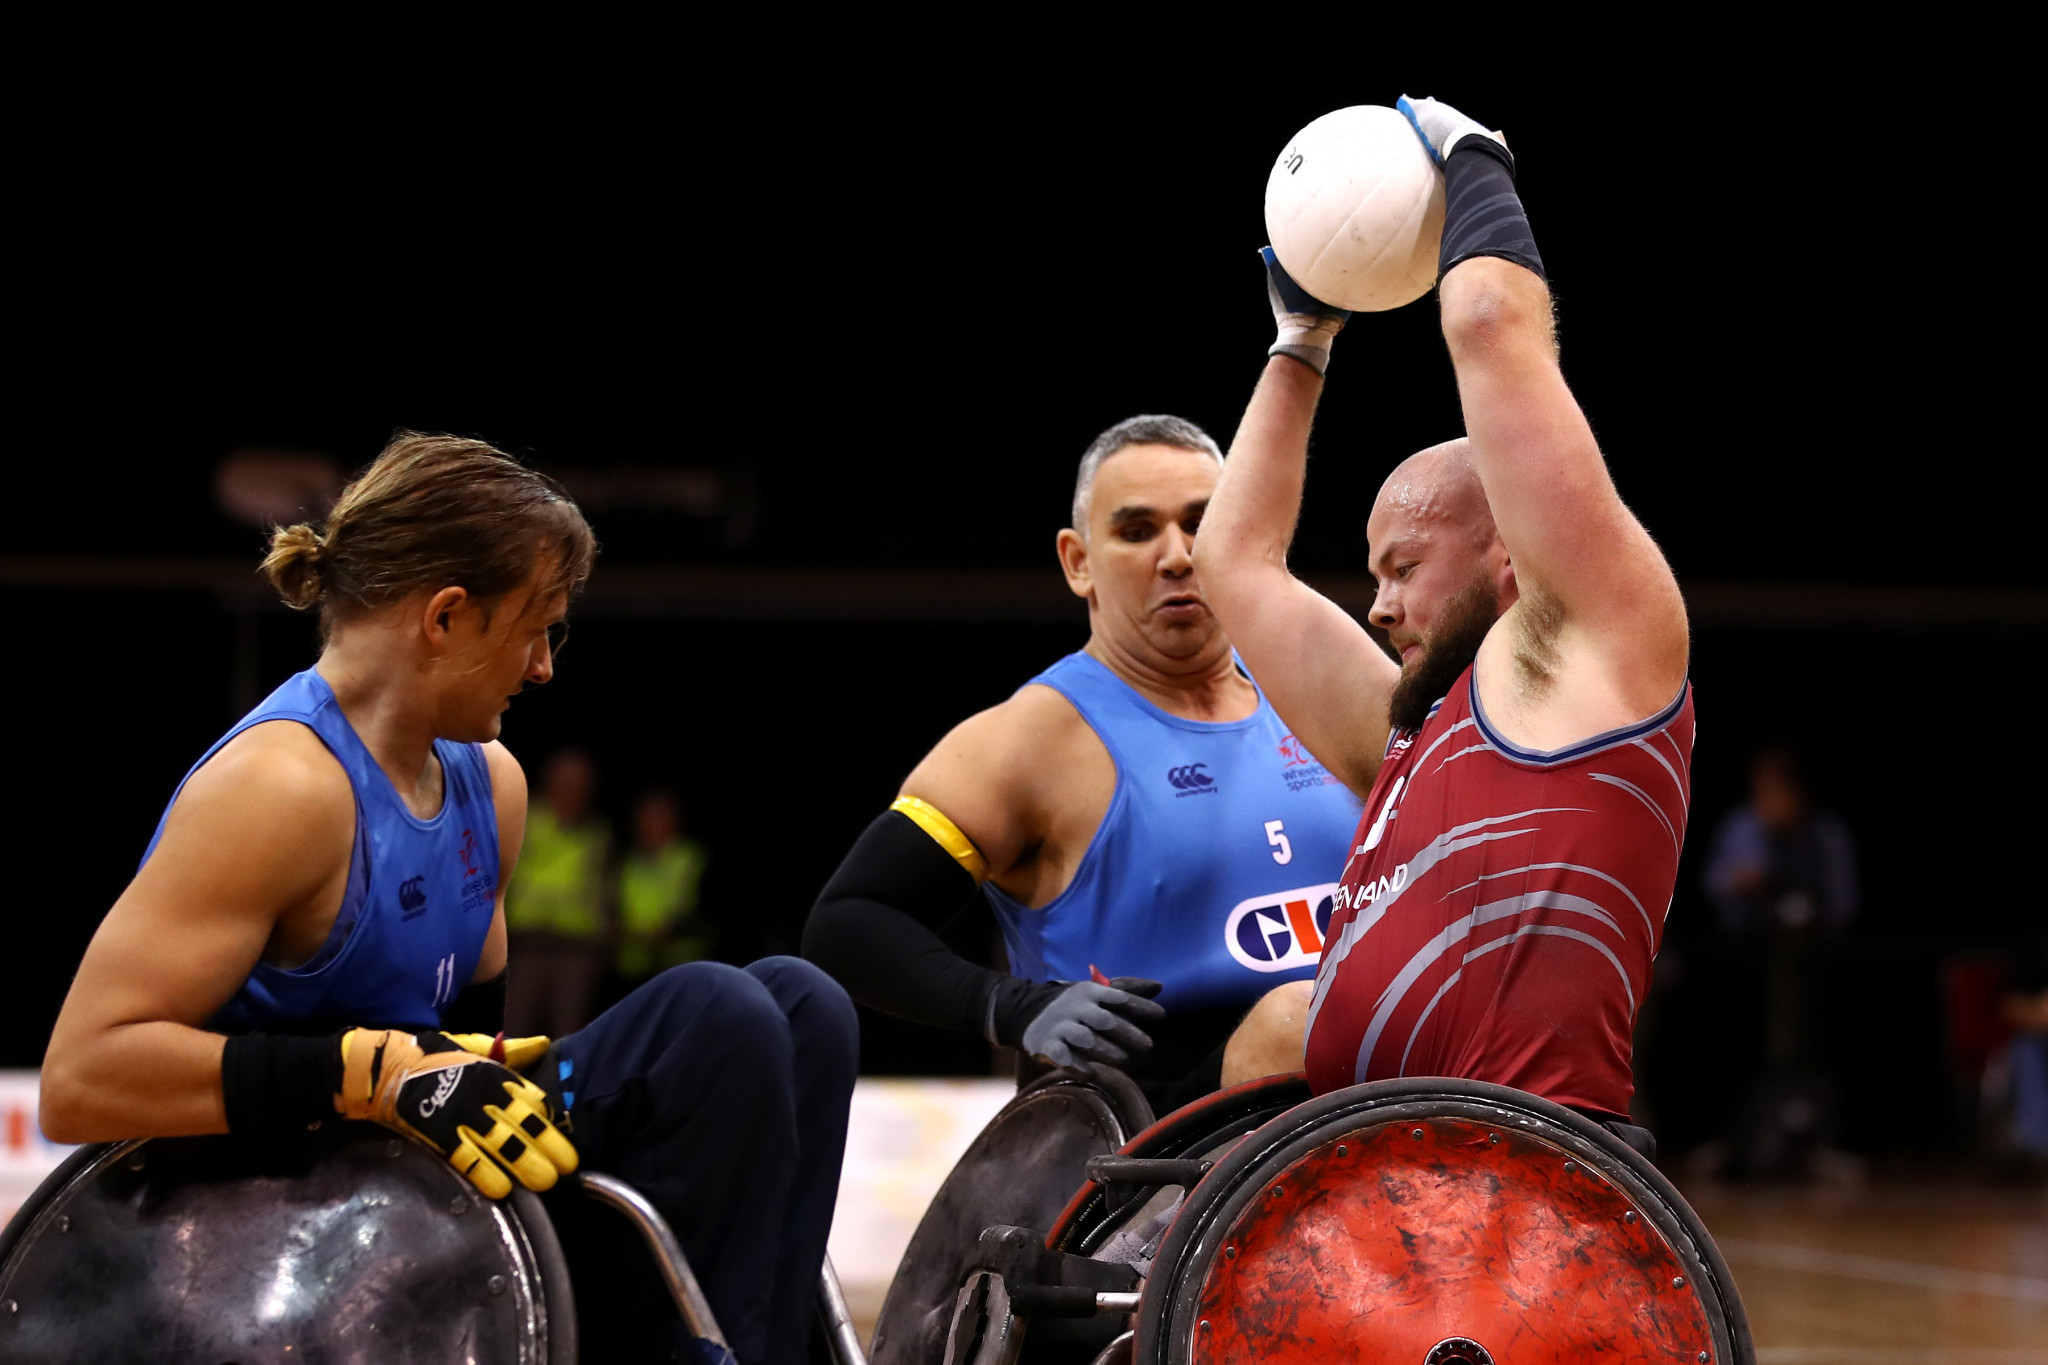 Eron Main has been involved in wheelchair rugby for more than 25 years ©Getty Images